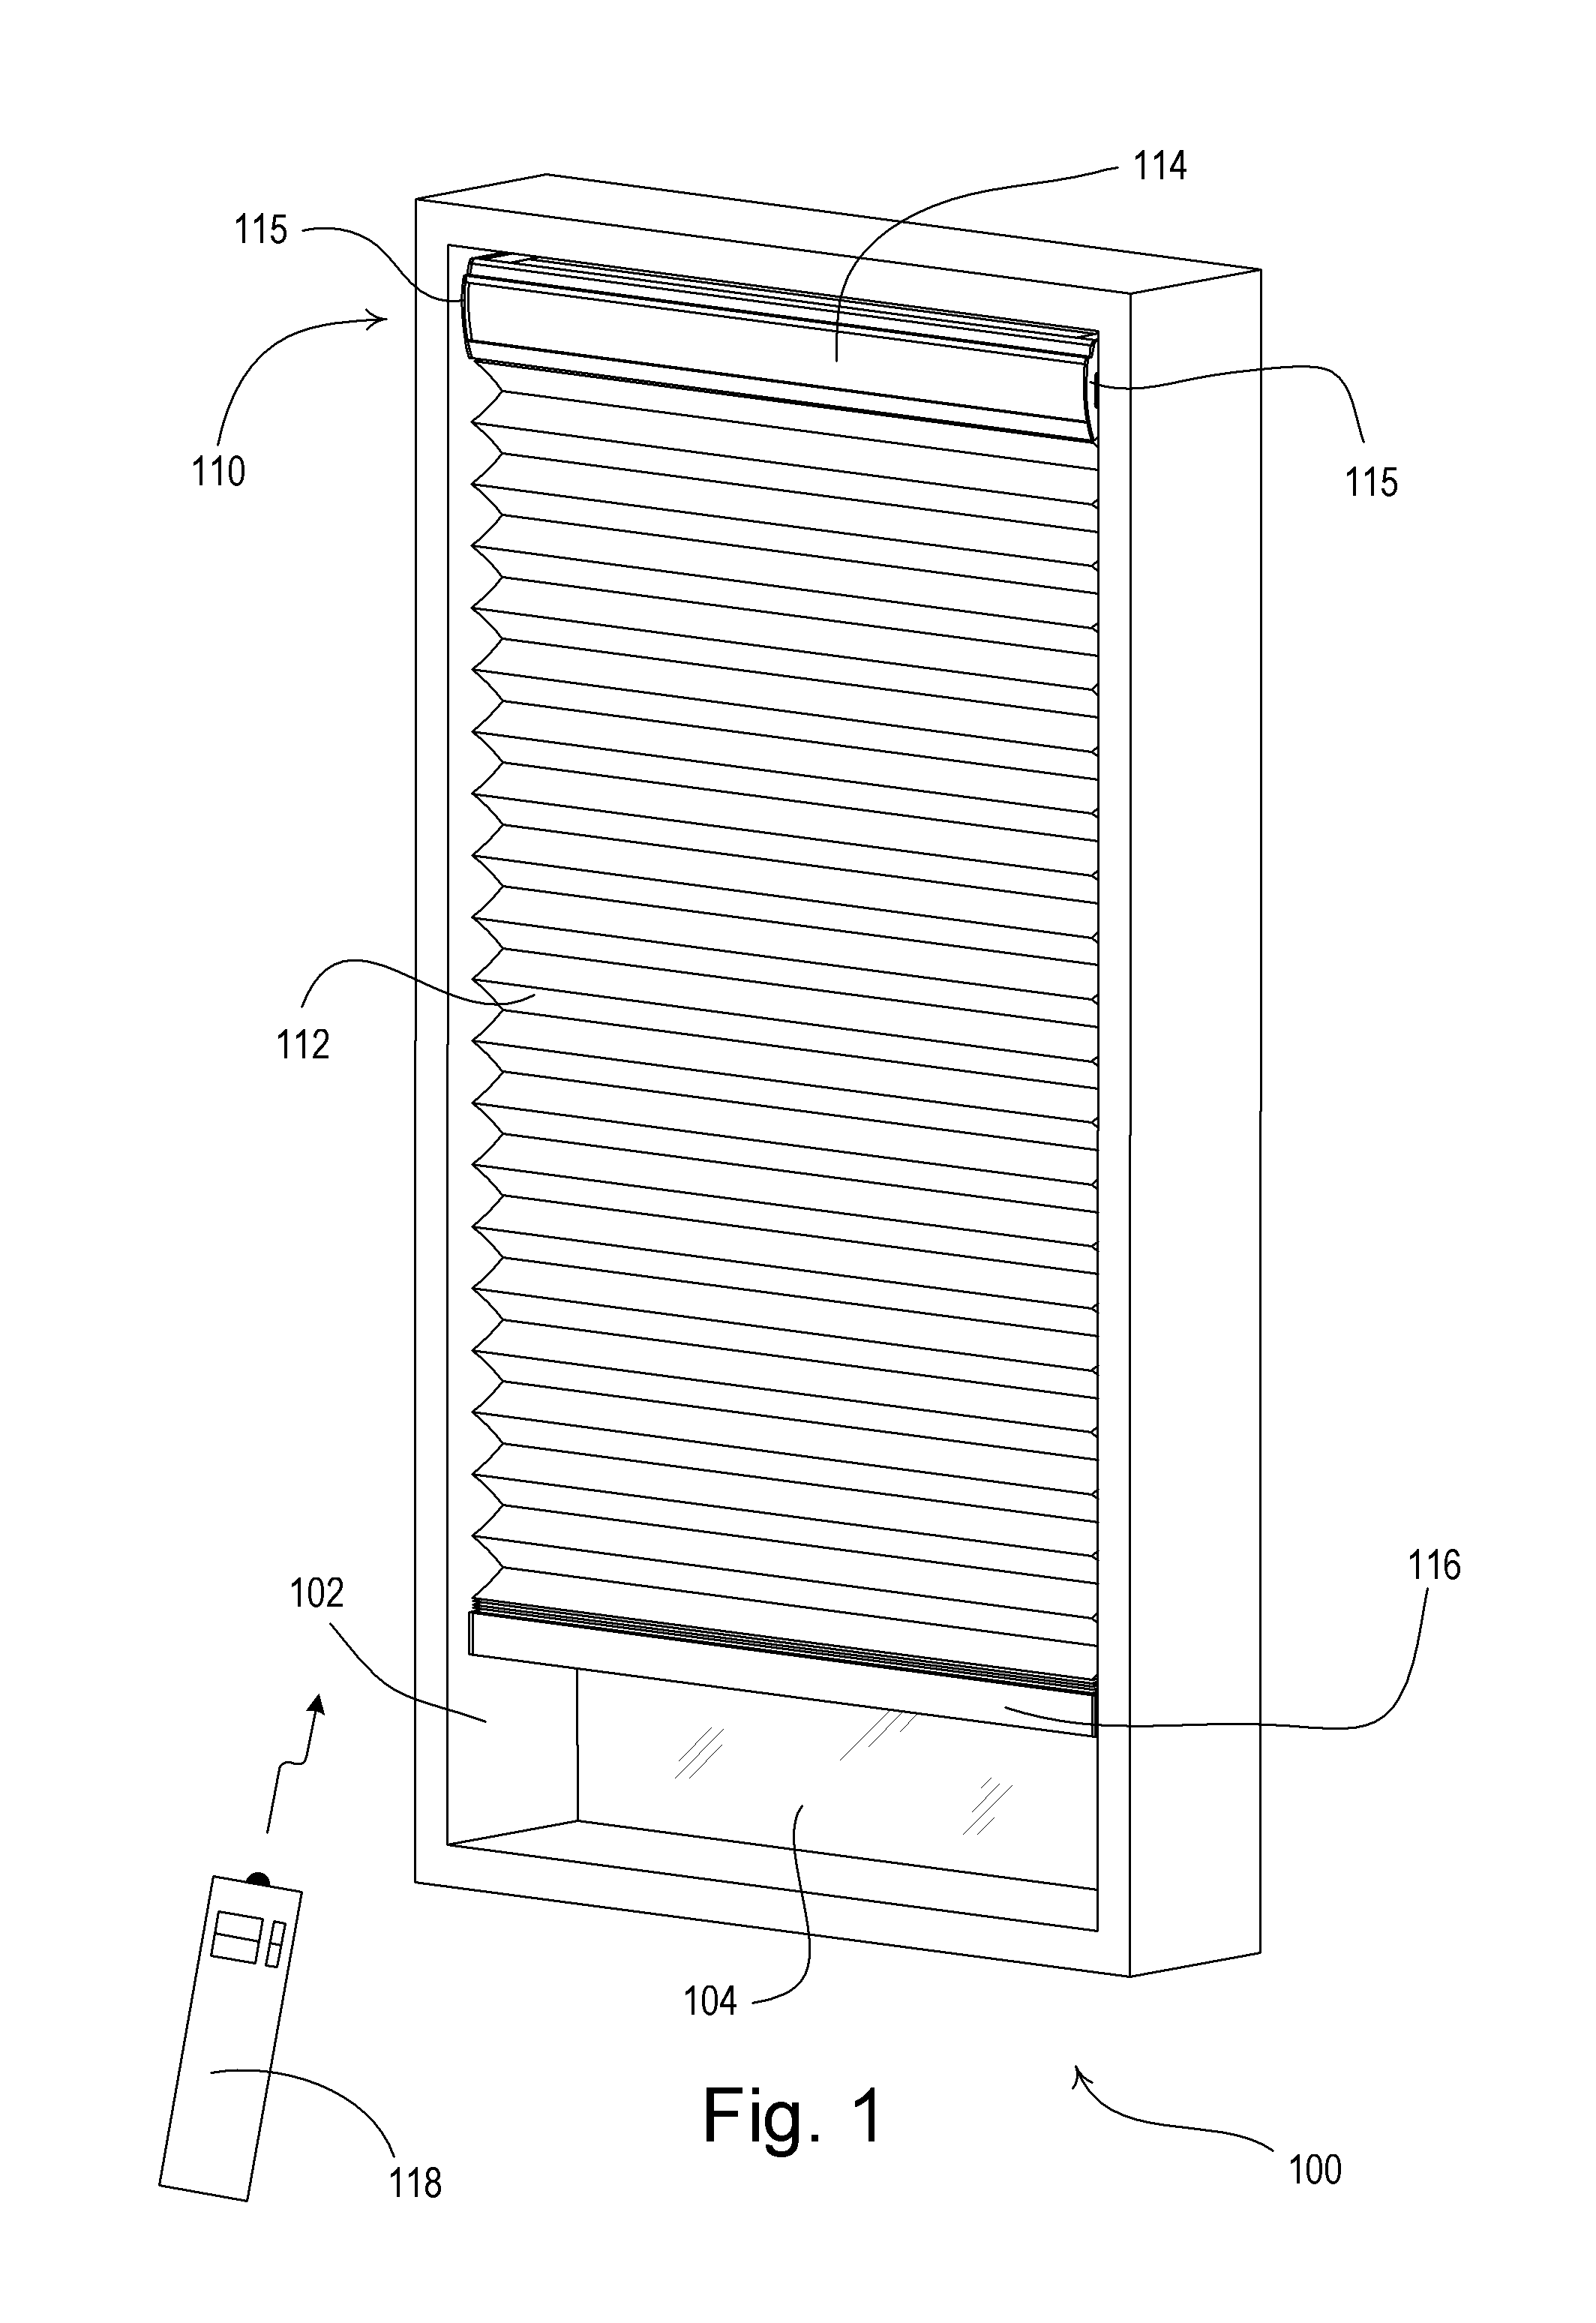 Method of controlling a motorized window treatment to save energy